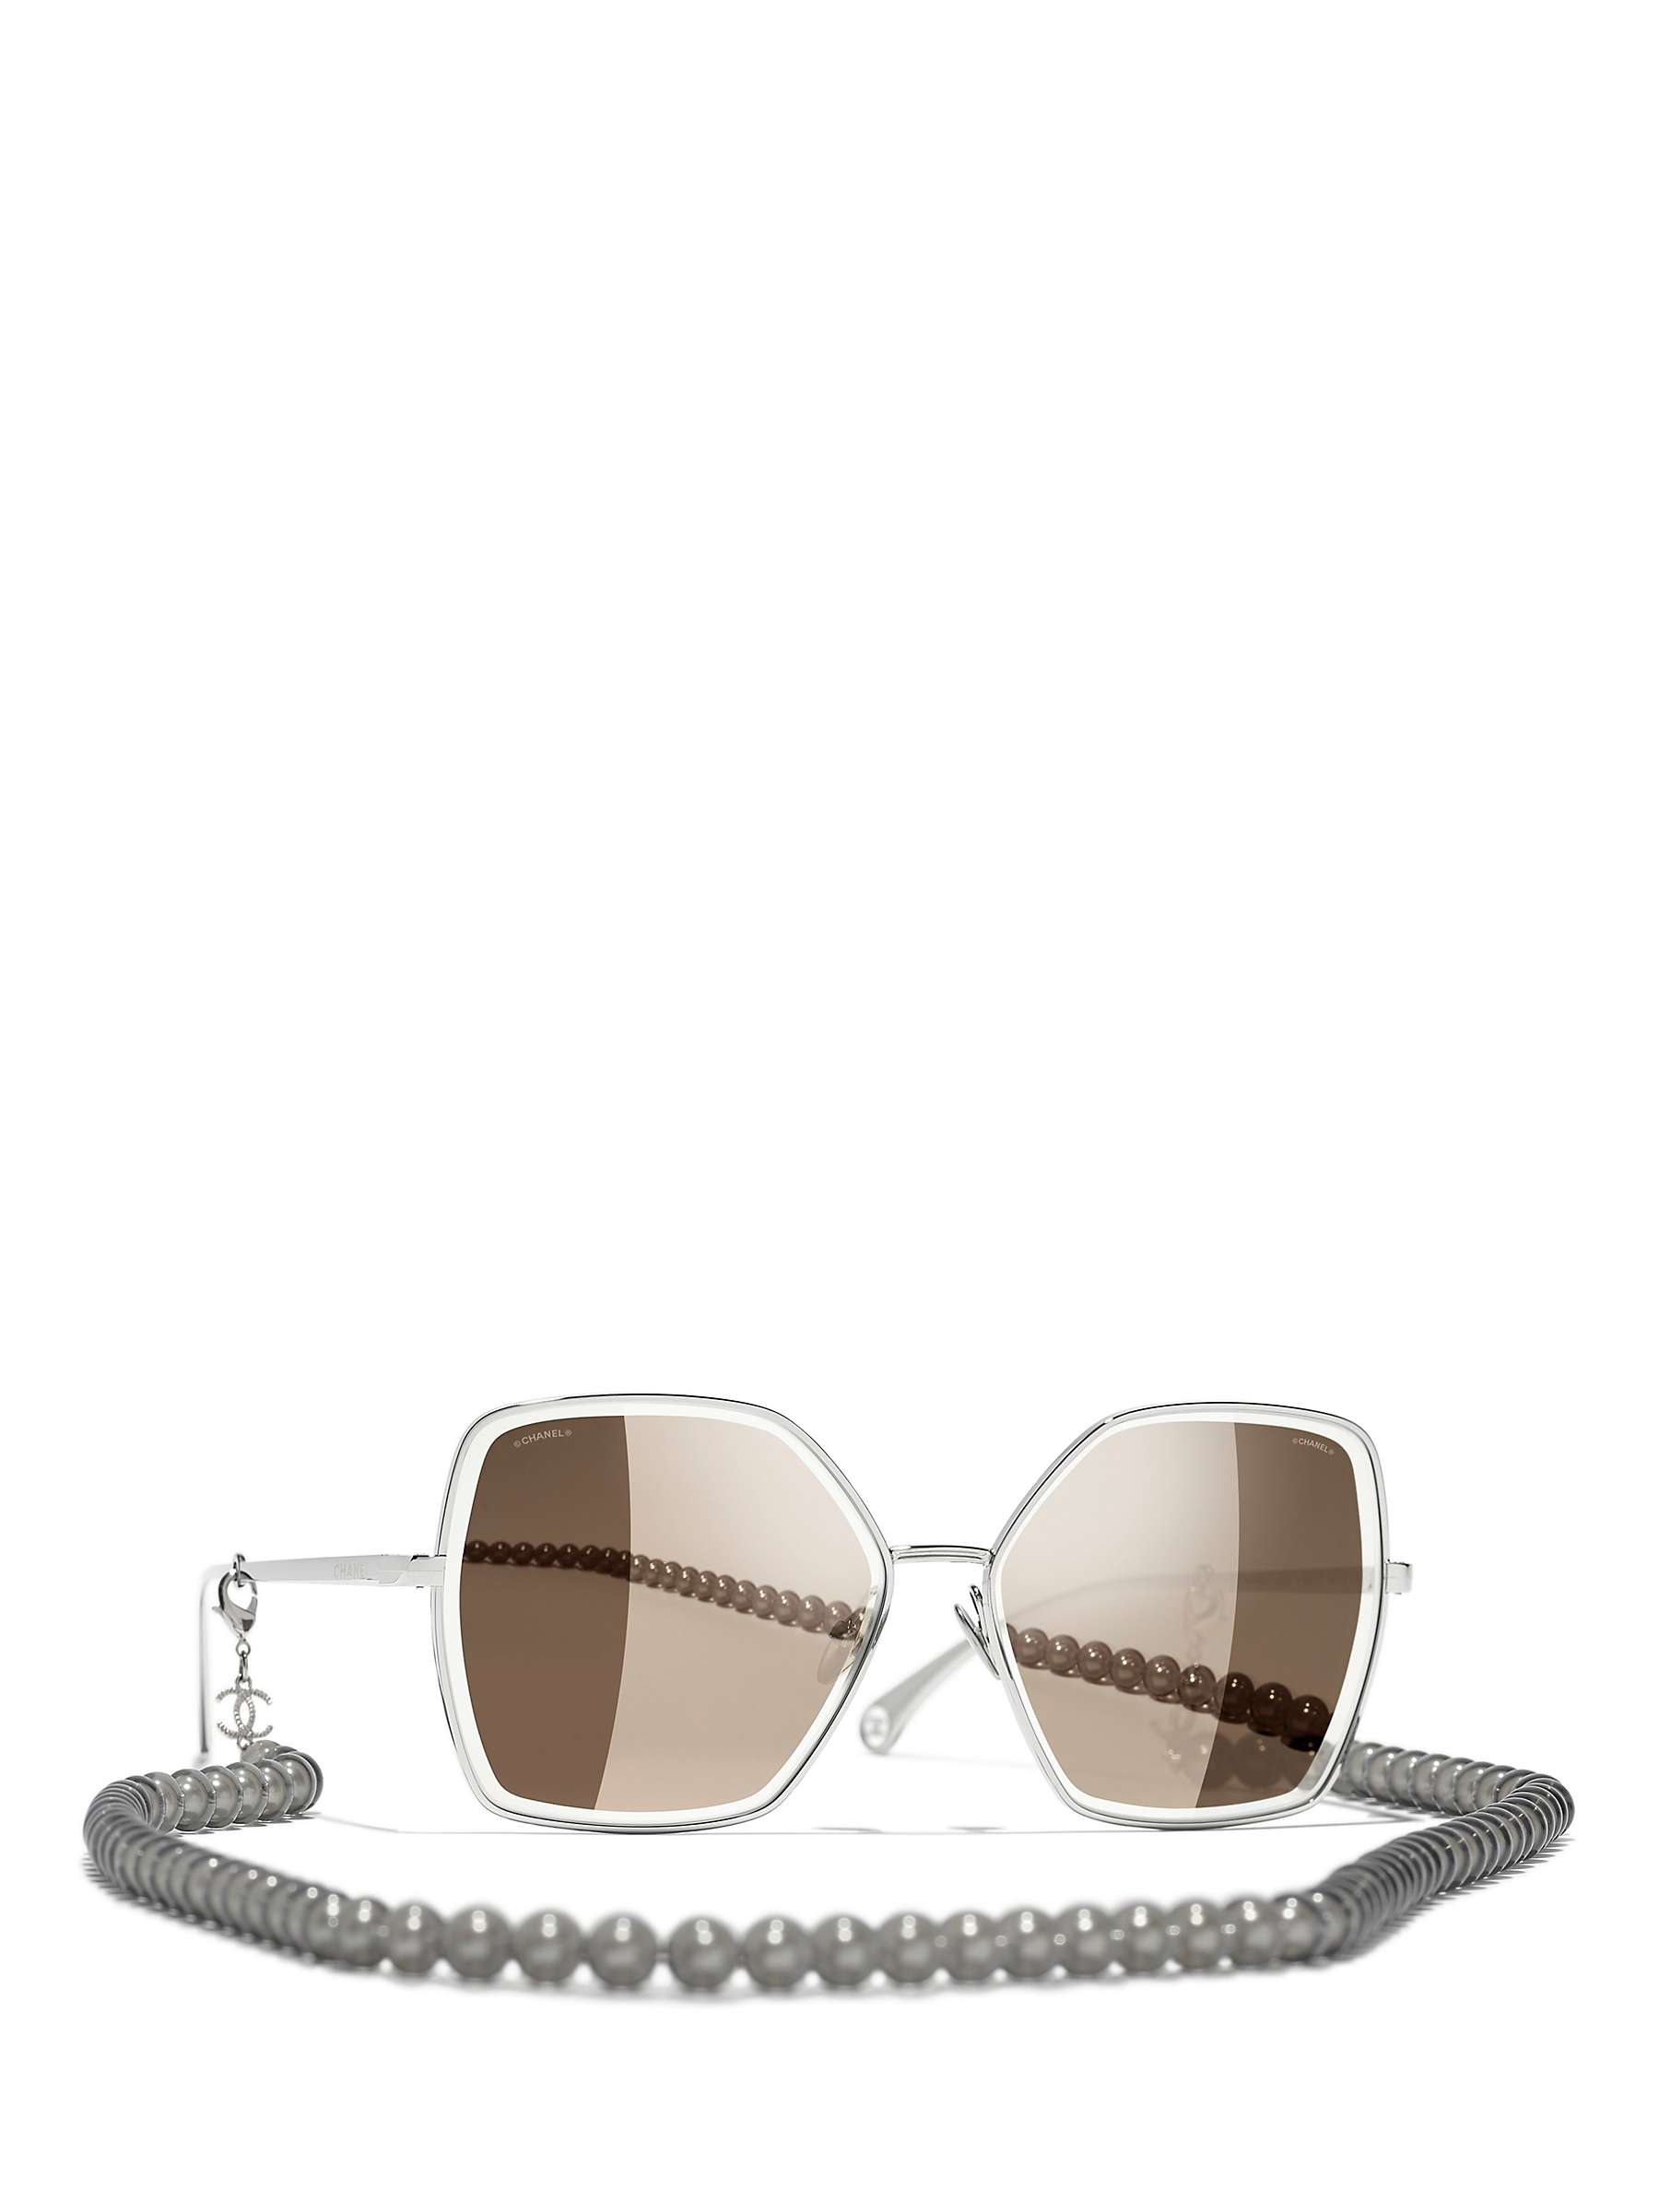 Buy CHANEL Pilot Sunglasses CH4262 Silver/Mirror Brown Online at johnlewis.com